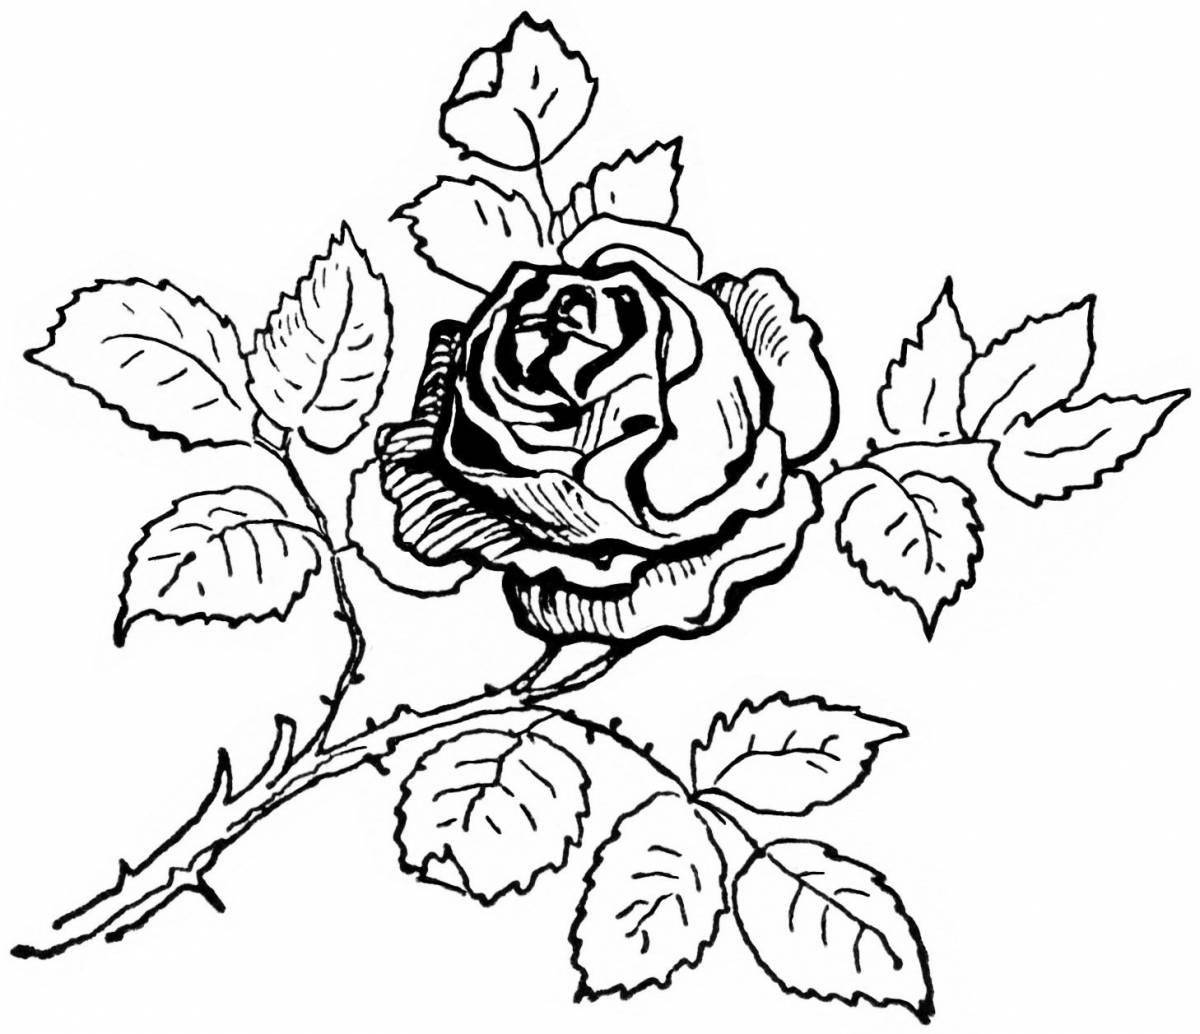 Violent rose coloring by numbers